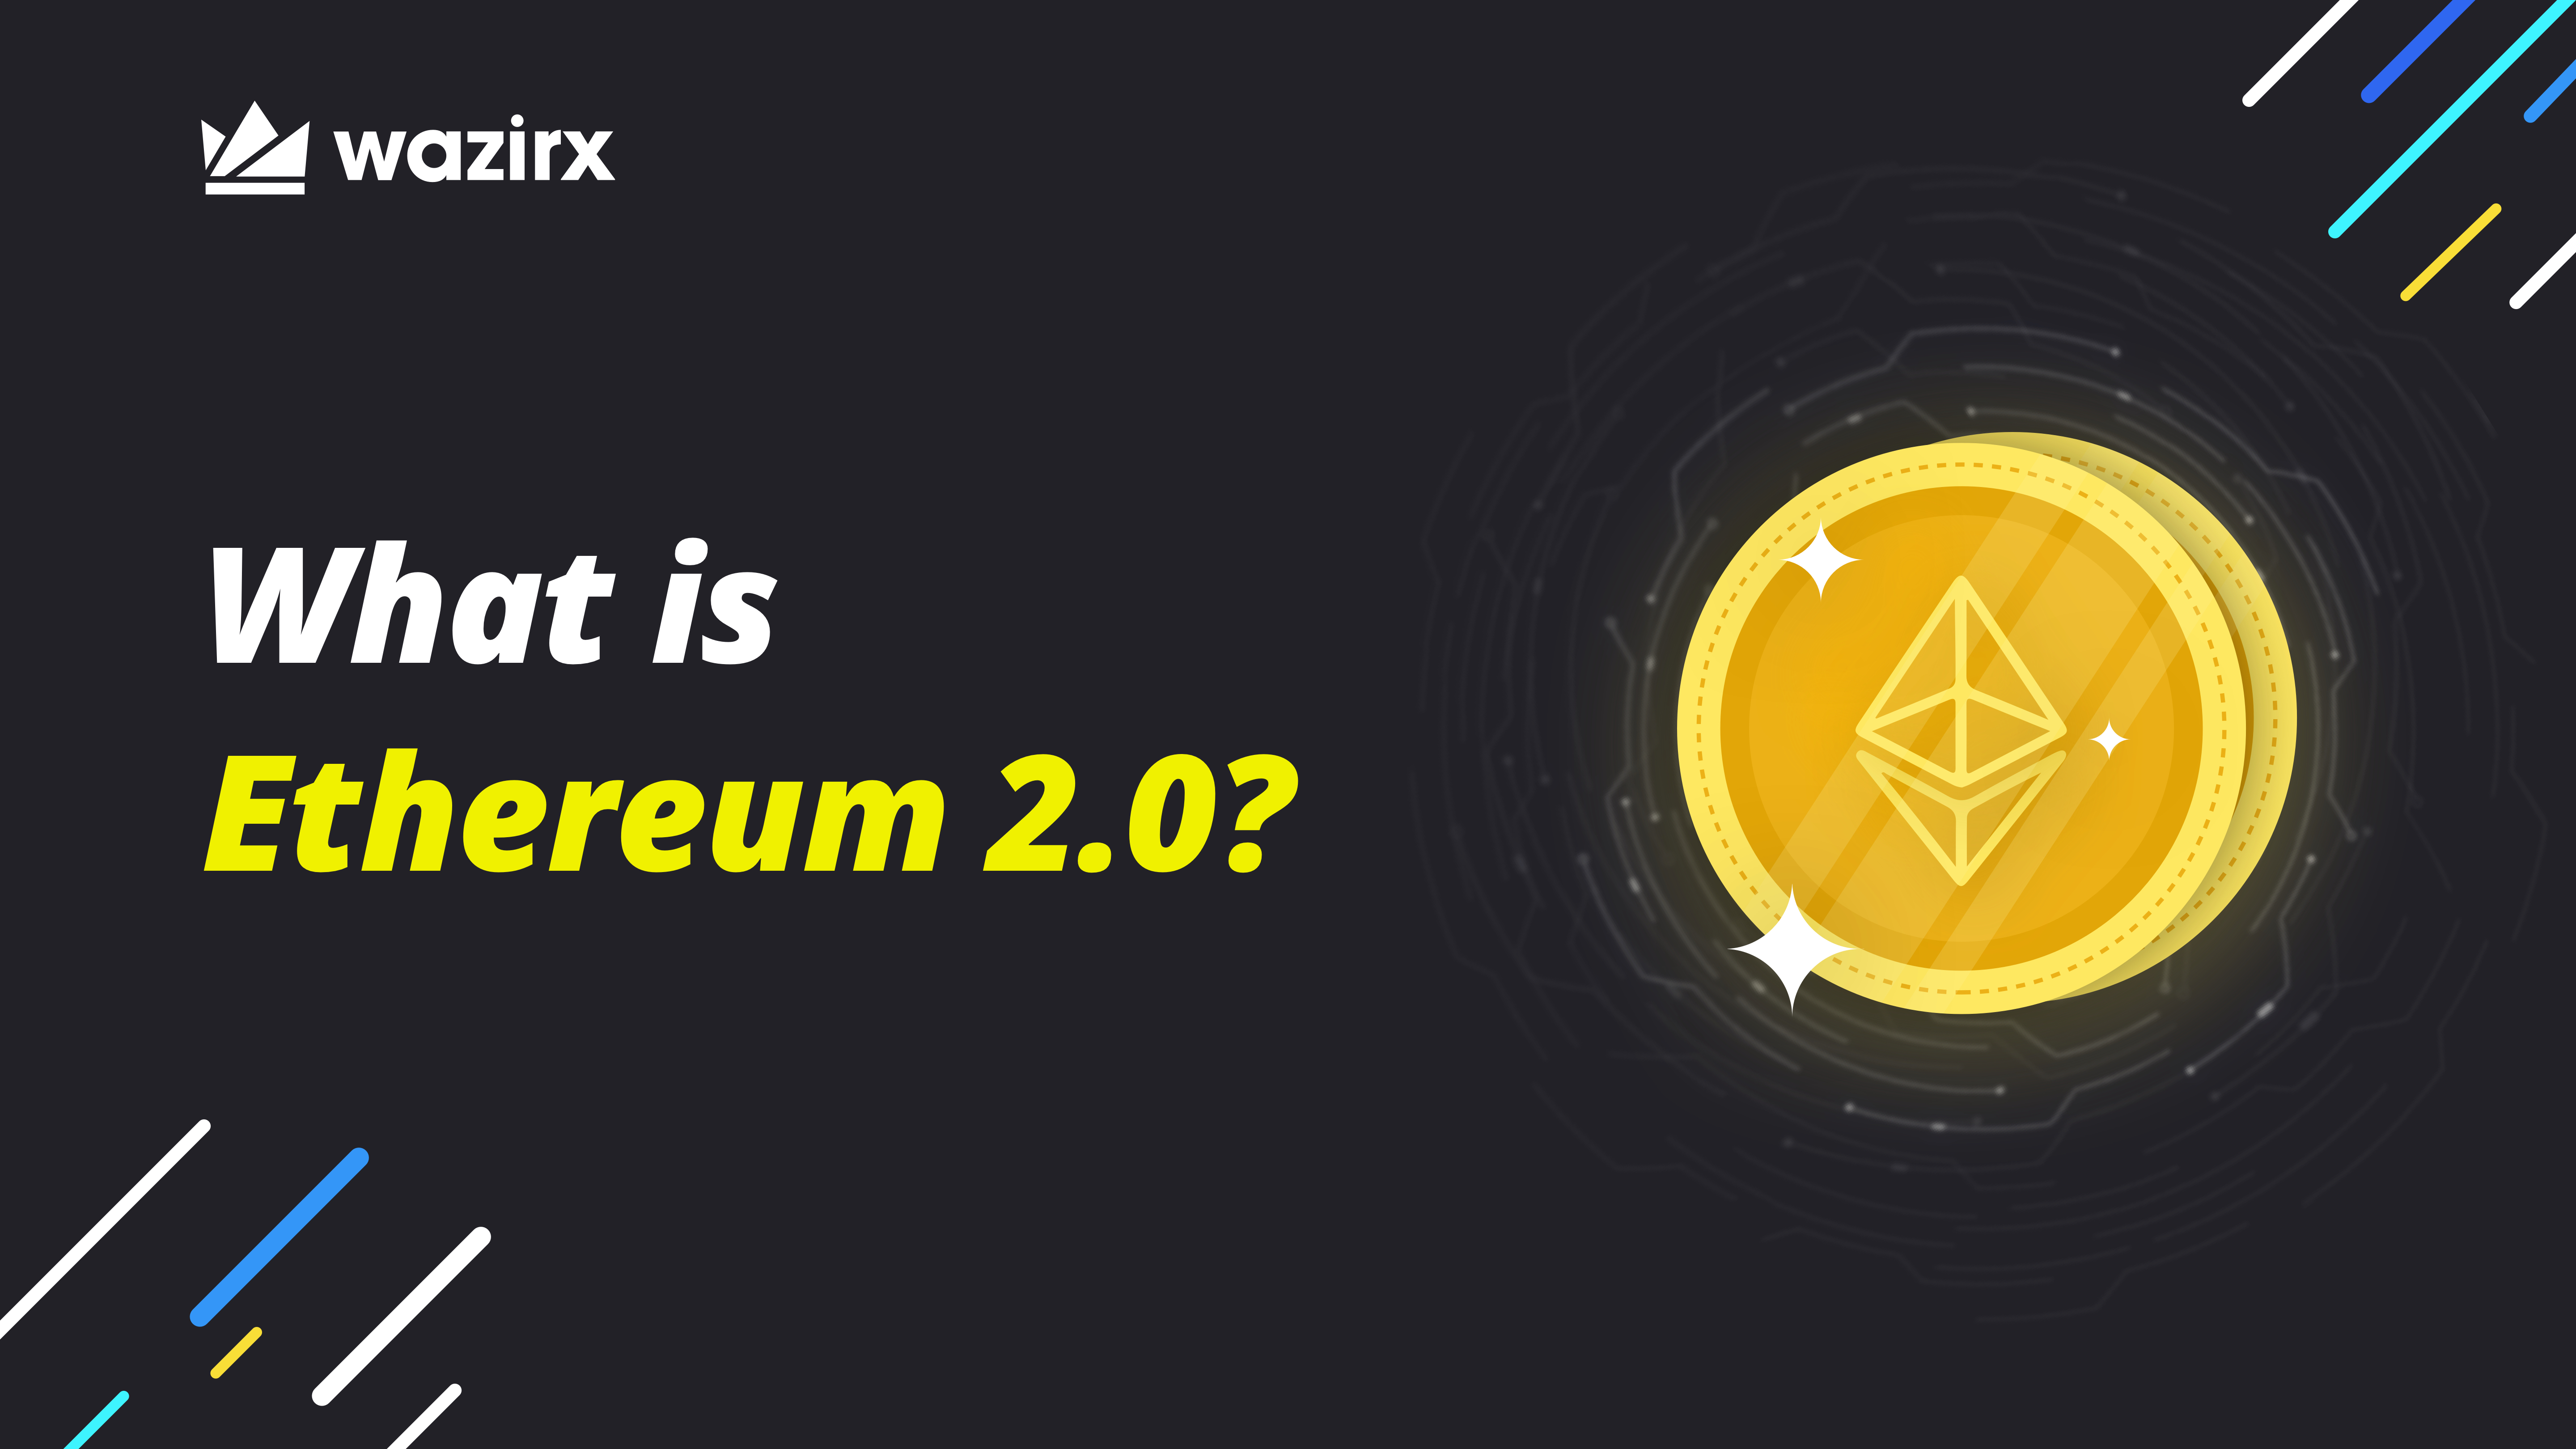 What is Ethereum 2.0? Is it different from Ethereum? | WazirX